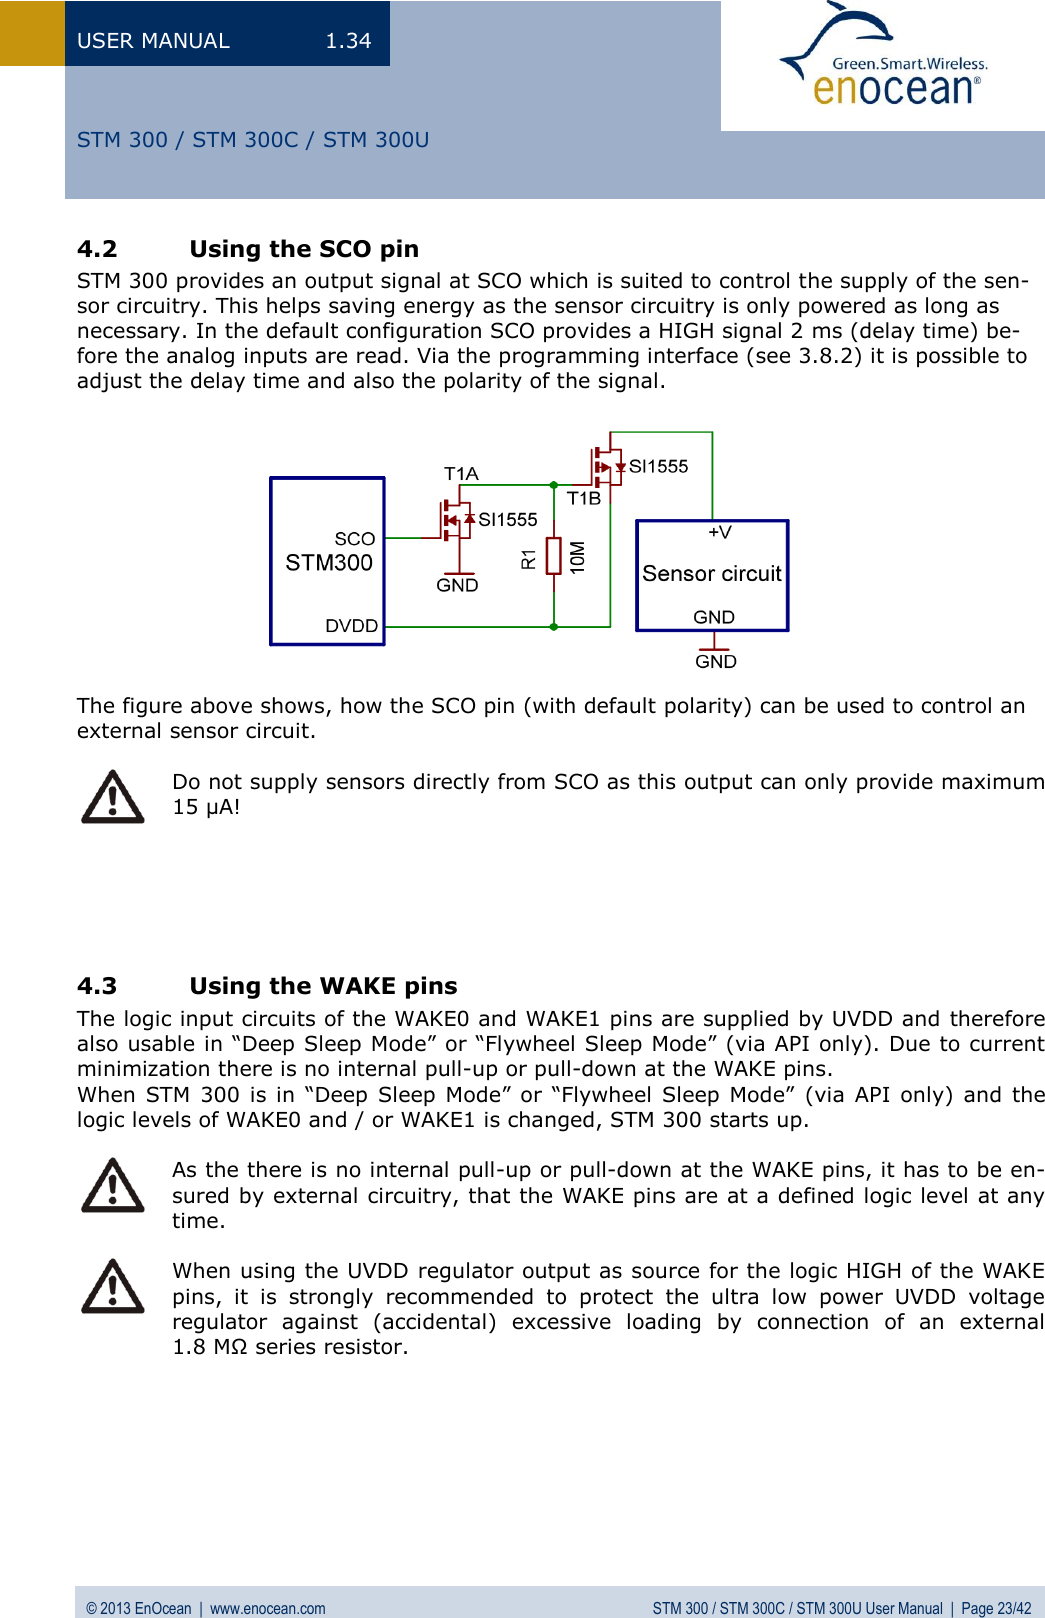 USER MANUAL  1.34 © 2013 EnOcean  |  www.enocean.com  STM 300 / STM 300C / STM 300U User Manual  |  Page 23/42   STM 300 / STM 300C / STM 300U 4.2 Using the SCO pin STM 300 provides an output signal at SCO which is suited to control the supply of the sen-sor circuitry. This helps saving energy as the sensor circuitry is only powered as long as necessary. In the default configuration SCO provides a HIGH signal 2 ms (delay time) be-fore the analog inputs are read. Via the programming interface (see 3.8.2) it is possible to adjust the delay time and also the polarity of the signal.             The figure above shows, how the SCO pin (with default polarity) can be used to control an external sensor circuit.   Do not supply sensors directly from SCO as this output can only provide maximum 15 µA!      4.3 Using the WAKE pins  The logic input circuits of the WAKE0 and WAKE1 pins are supplied by UVDD and therefore also usable in “Deep Sleep Mode” or “Flywheel Sleep Mode” (via API only). Due to current minimization there is no internal pull-up or pull-down at the WAKE pins. When STM 300 is  in  “Deep  Sleep  Mode”  or  “Flywheel Sleep Mode” (via API  only) and the logic levels of WAKE0 and / or WAKE1 is changed, STM 300 starts up.   As the there is no internal pull-up or pull-down at the WAKE pins, it has to be en-sured by external circuitry, that the WAKE pins are at a defined logic level at any time.   When using the UVDD regulator output as source for the logic HIGH of the WAKE pins,  it  is  strongly  recommended  to  protect  the  ultra  low  power  UVDD  voltage regulator  against  (accidental)  excessive  loading  by  connection  of  an  external 1.8 MΩ series resistor.    